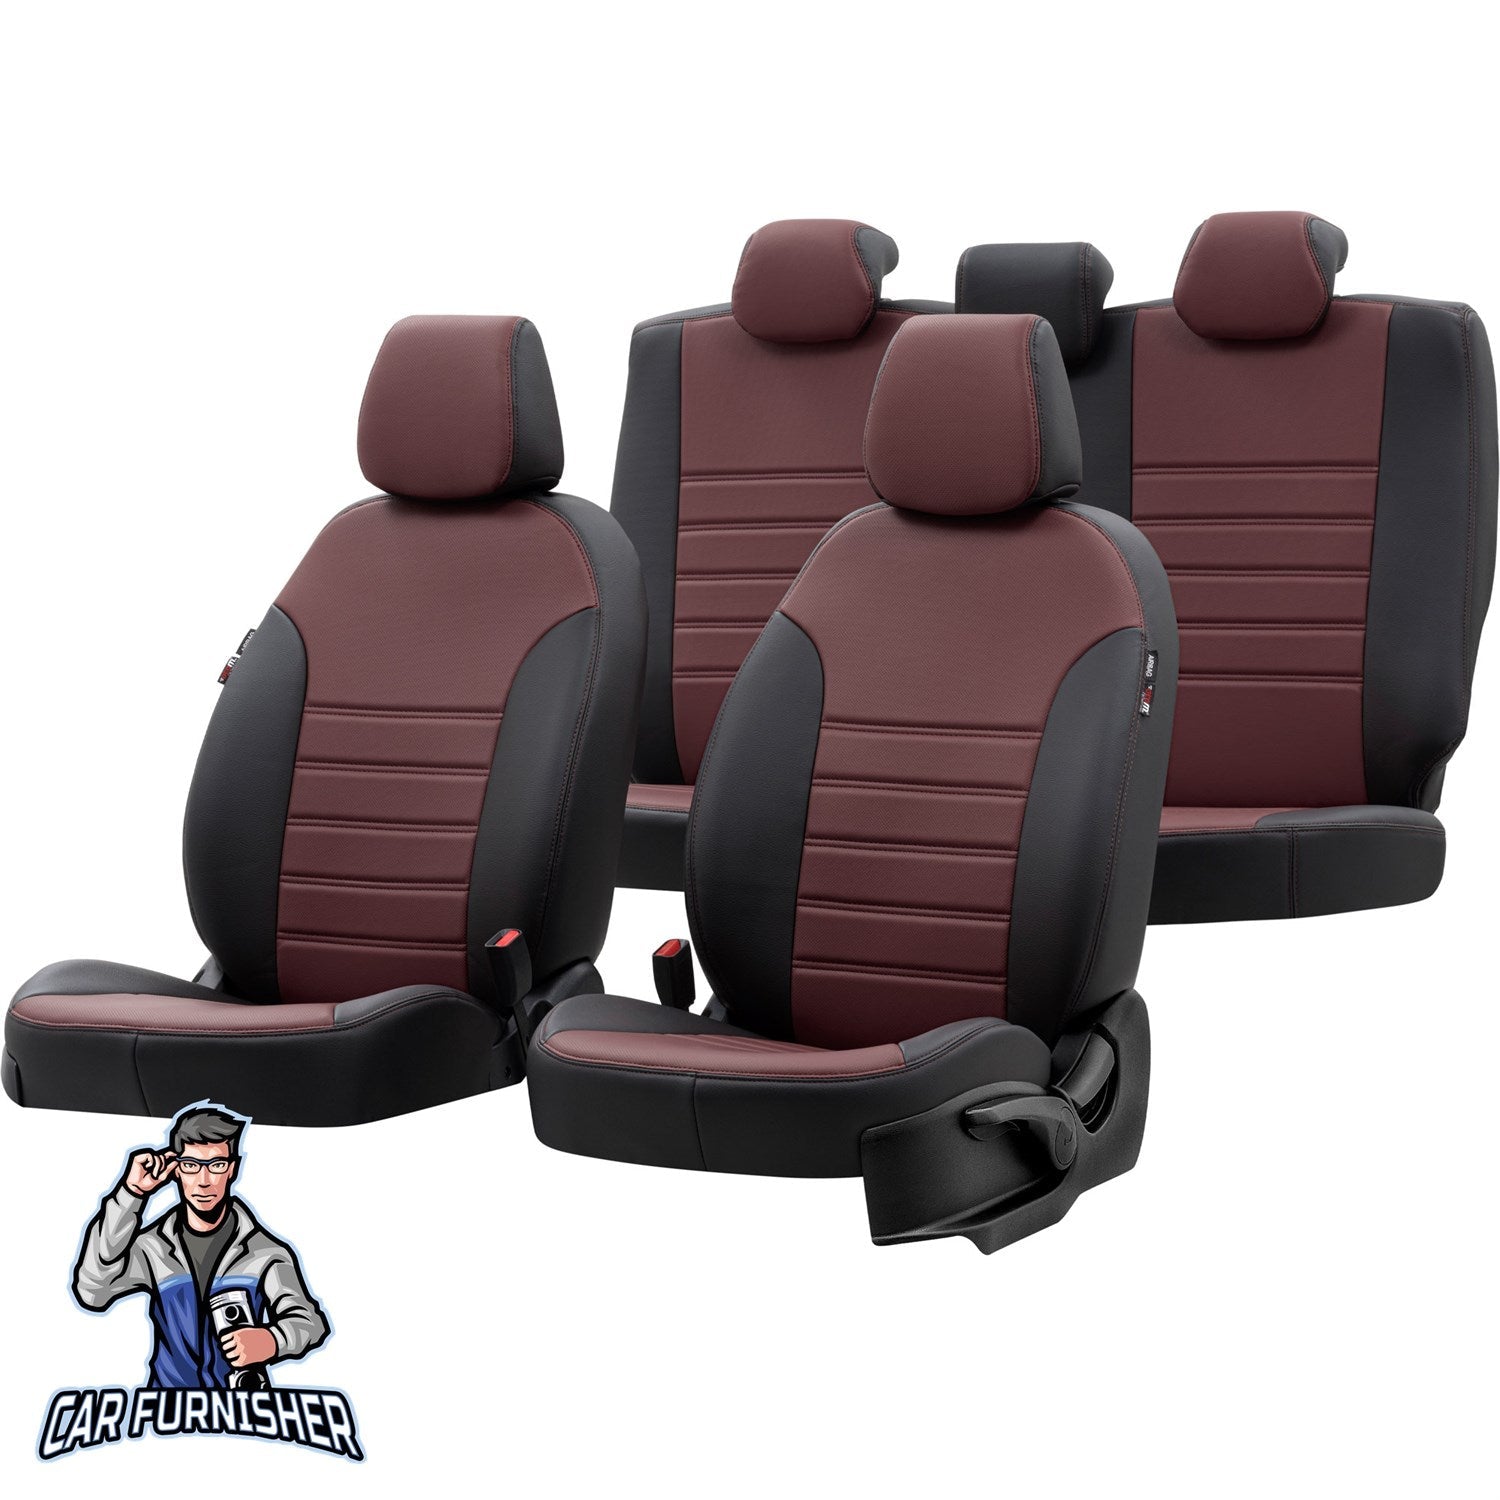 Mercedes Atego Seat Covers Istanbul Leather Design Burgundy Leather